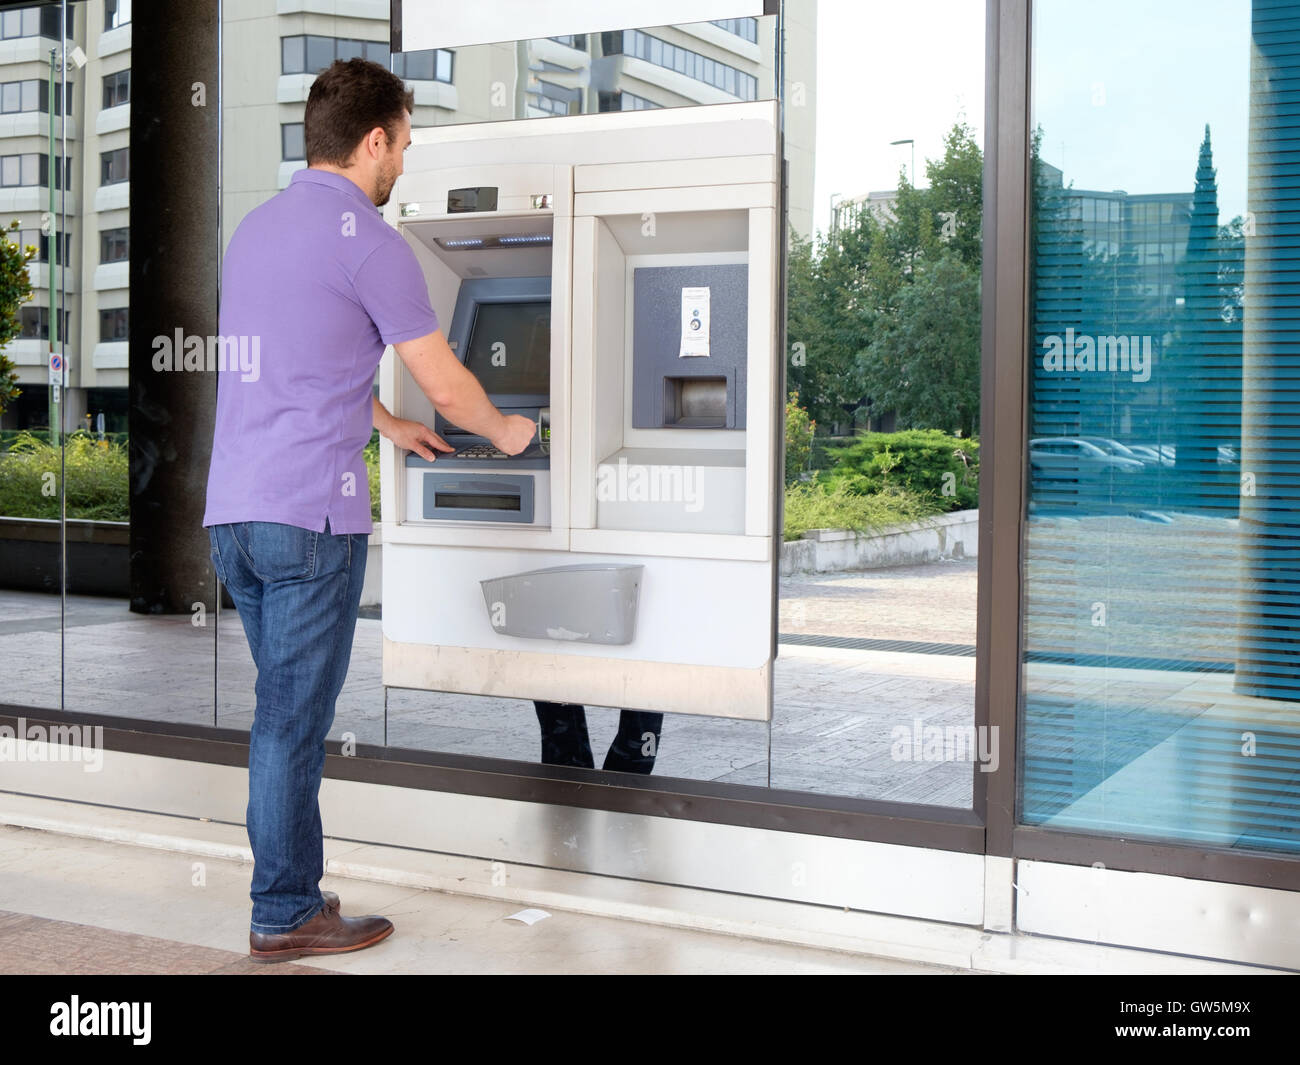 Man using his credit card in an atm for cash withdrawal Stock Photo